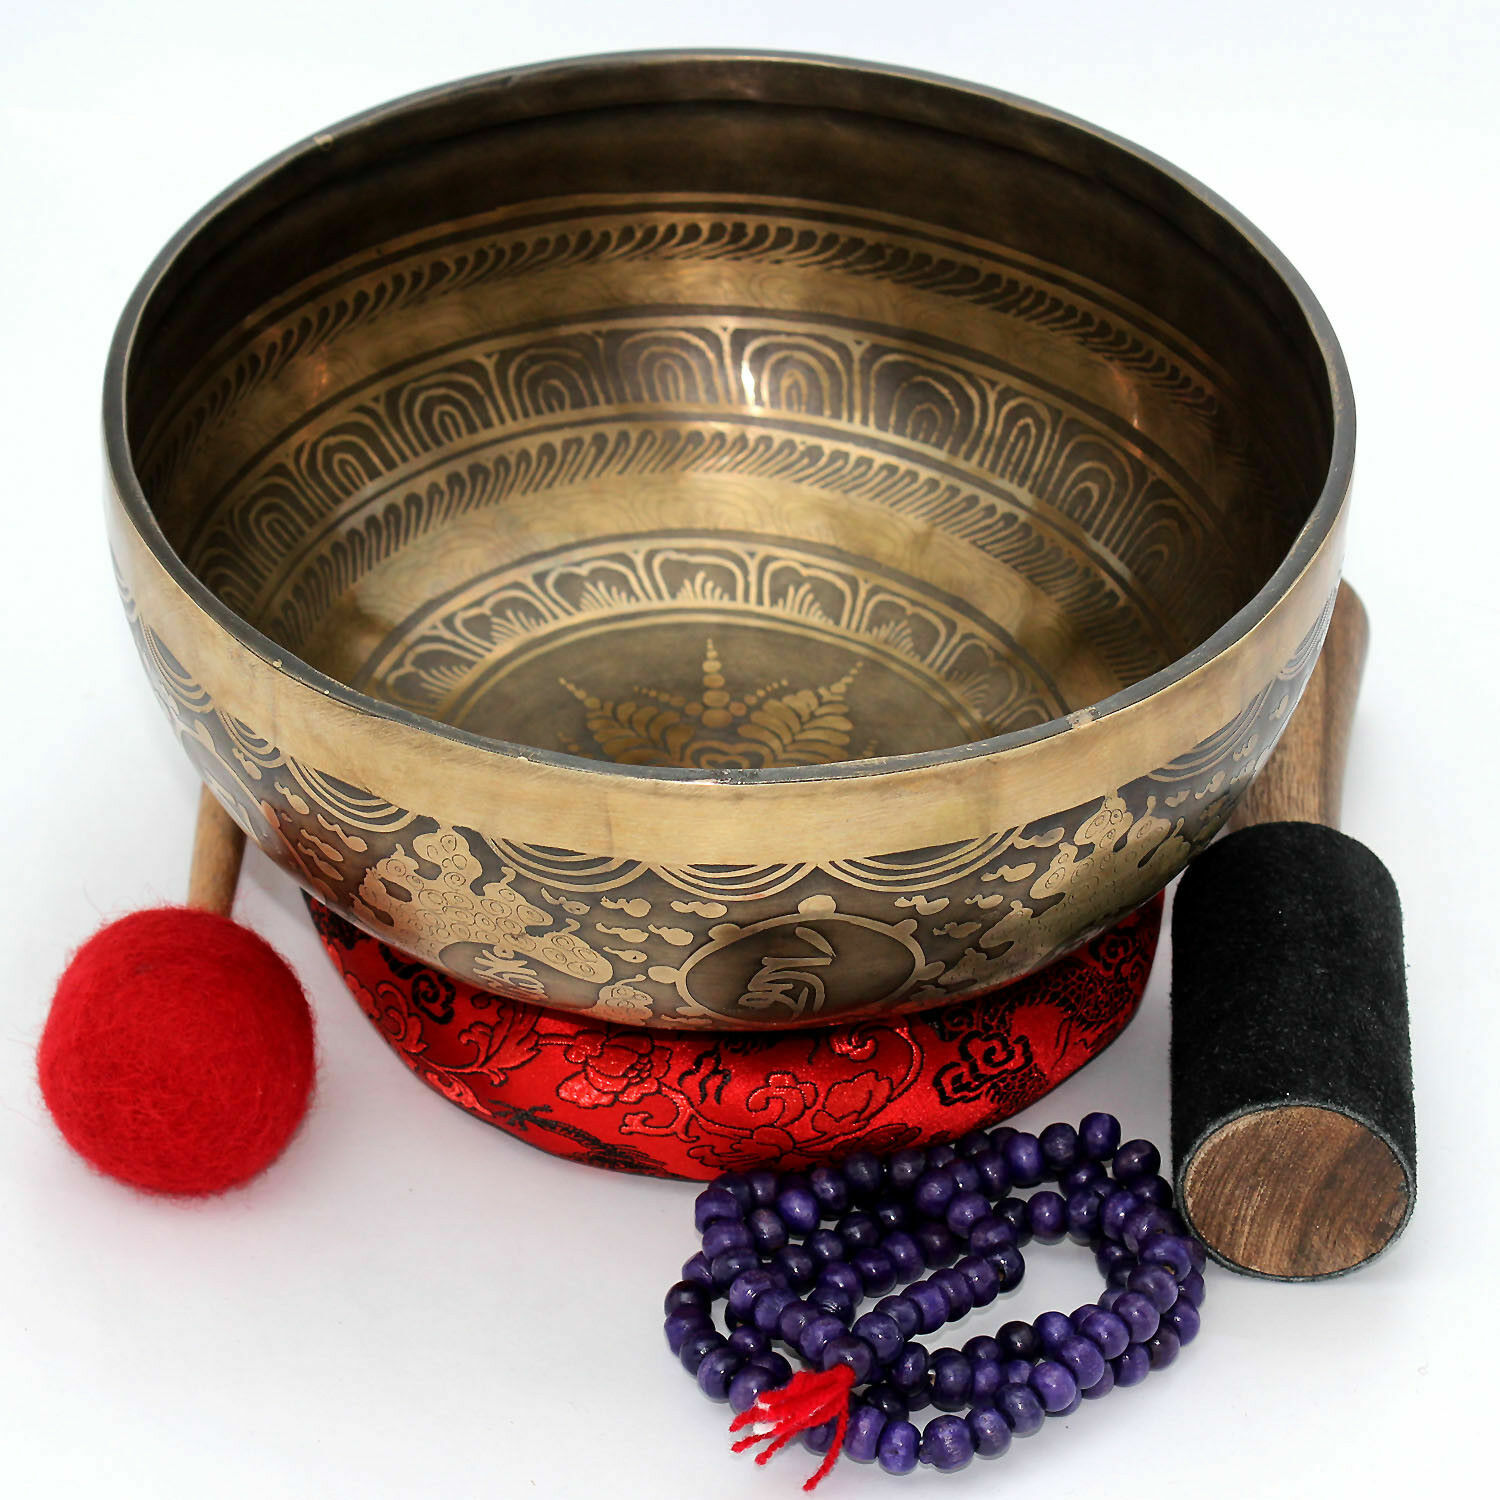  Mantra Singing Bowl- Sound Therapy Stress Reduction Chakra Frequency Healing 